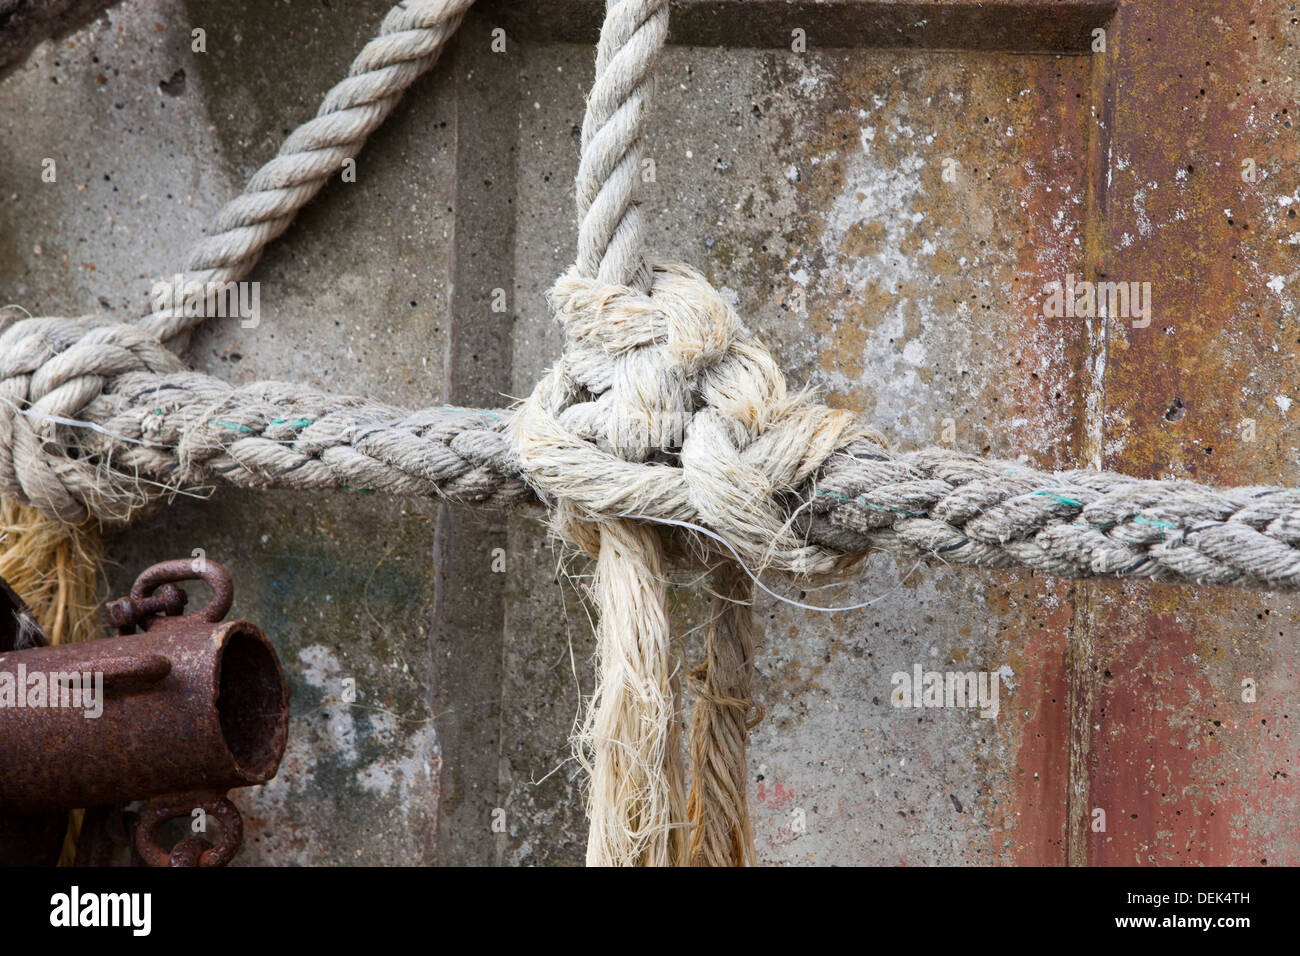 Tied knot rope, close up Stock Photo